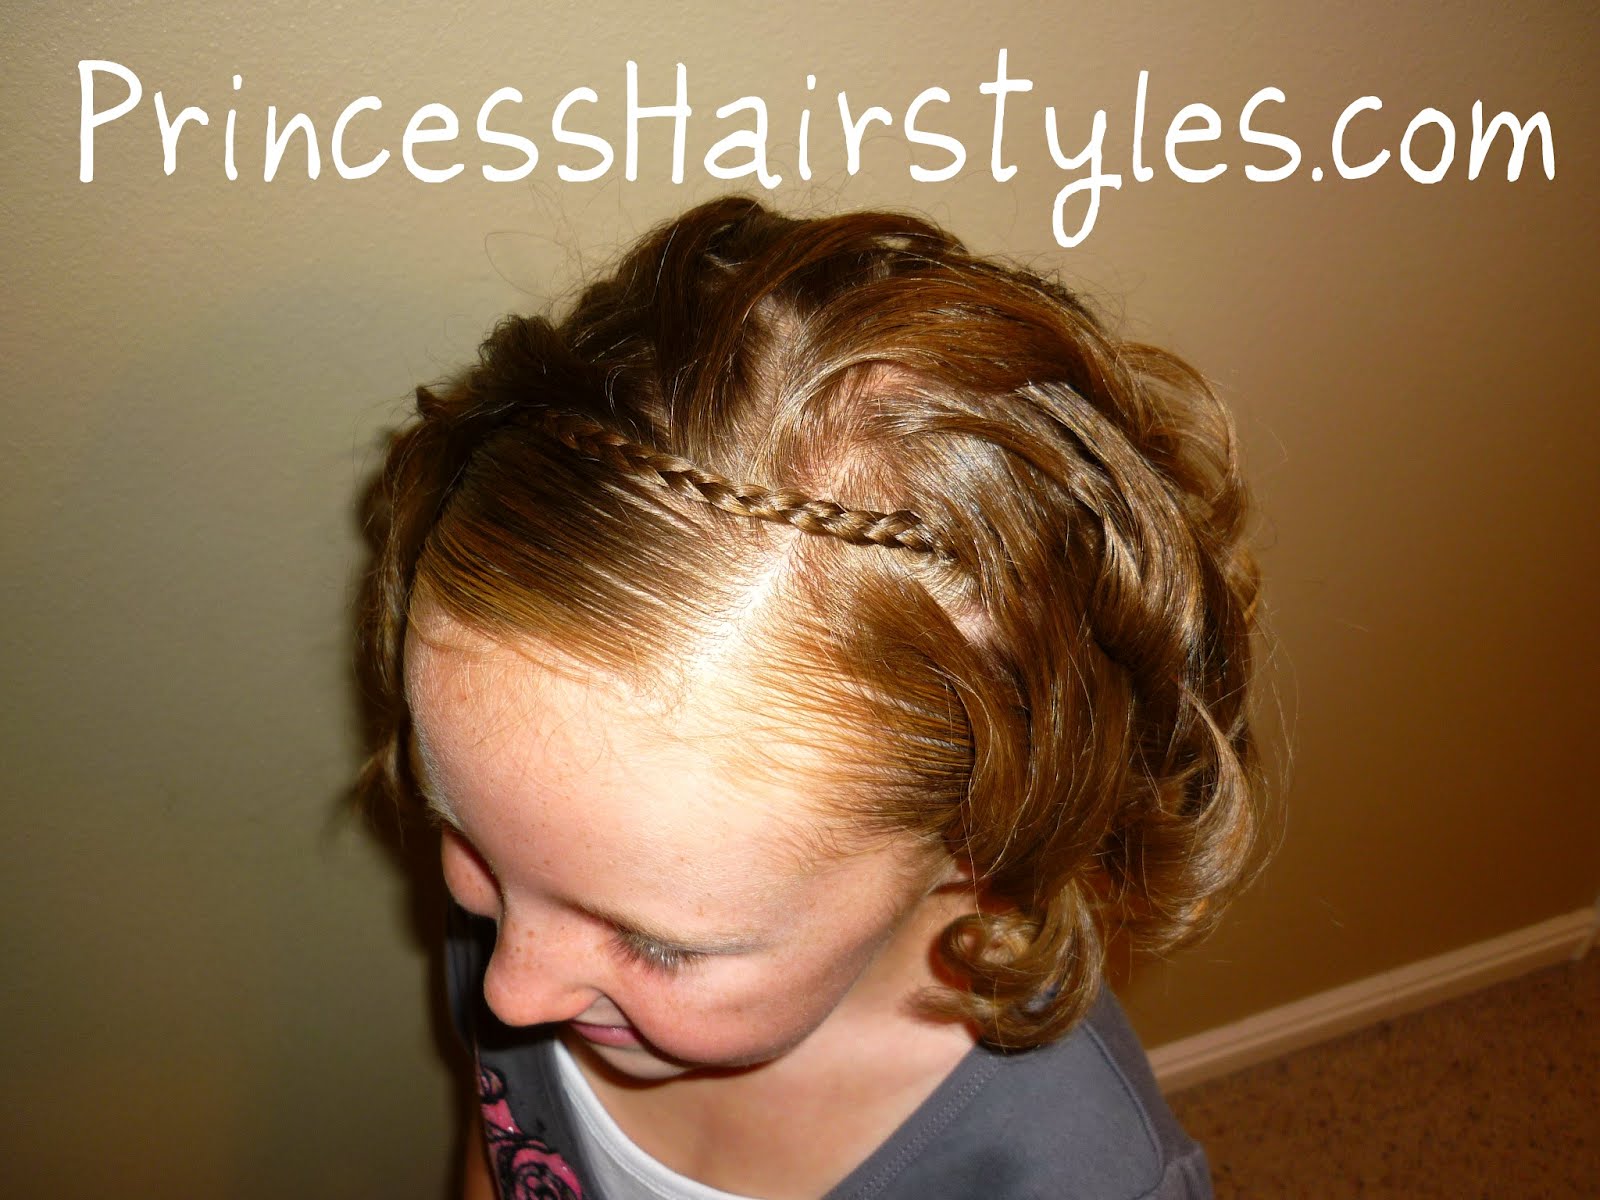 Braided Headband - For Short Hair Too | Hairstyles For Girls - Princess  Hairstyles